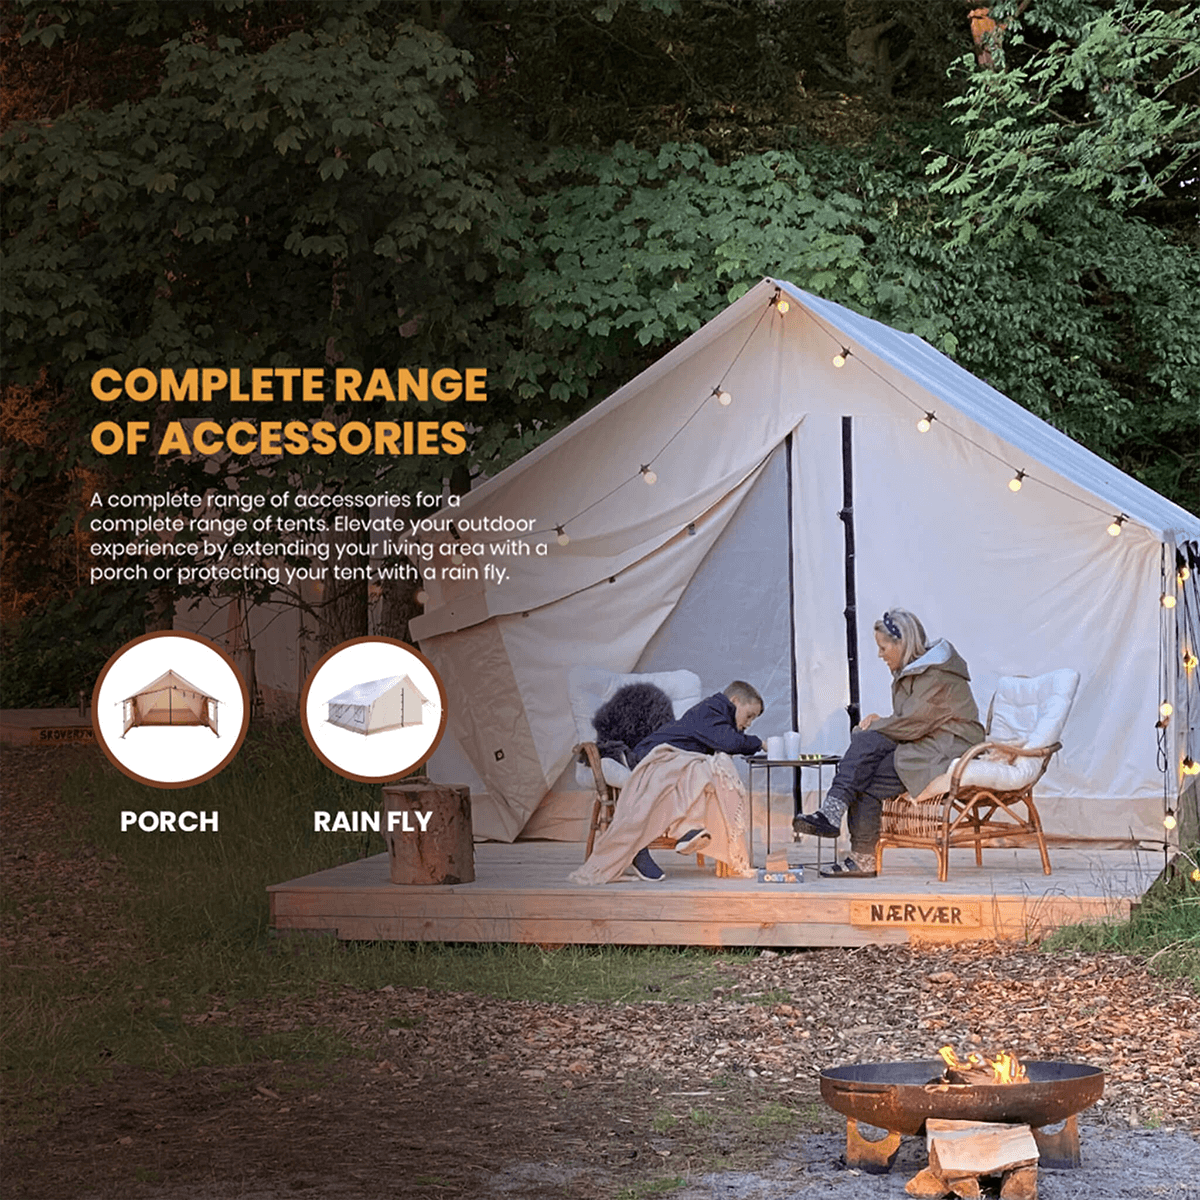 The Best Luxury Camp Gear to Elevate Your Outdoor Experience - The